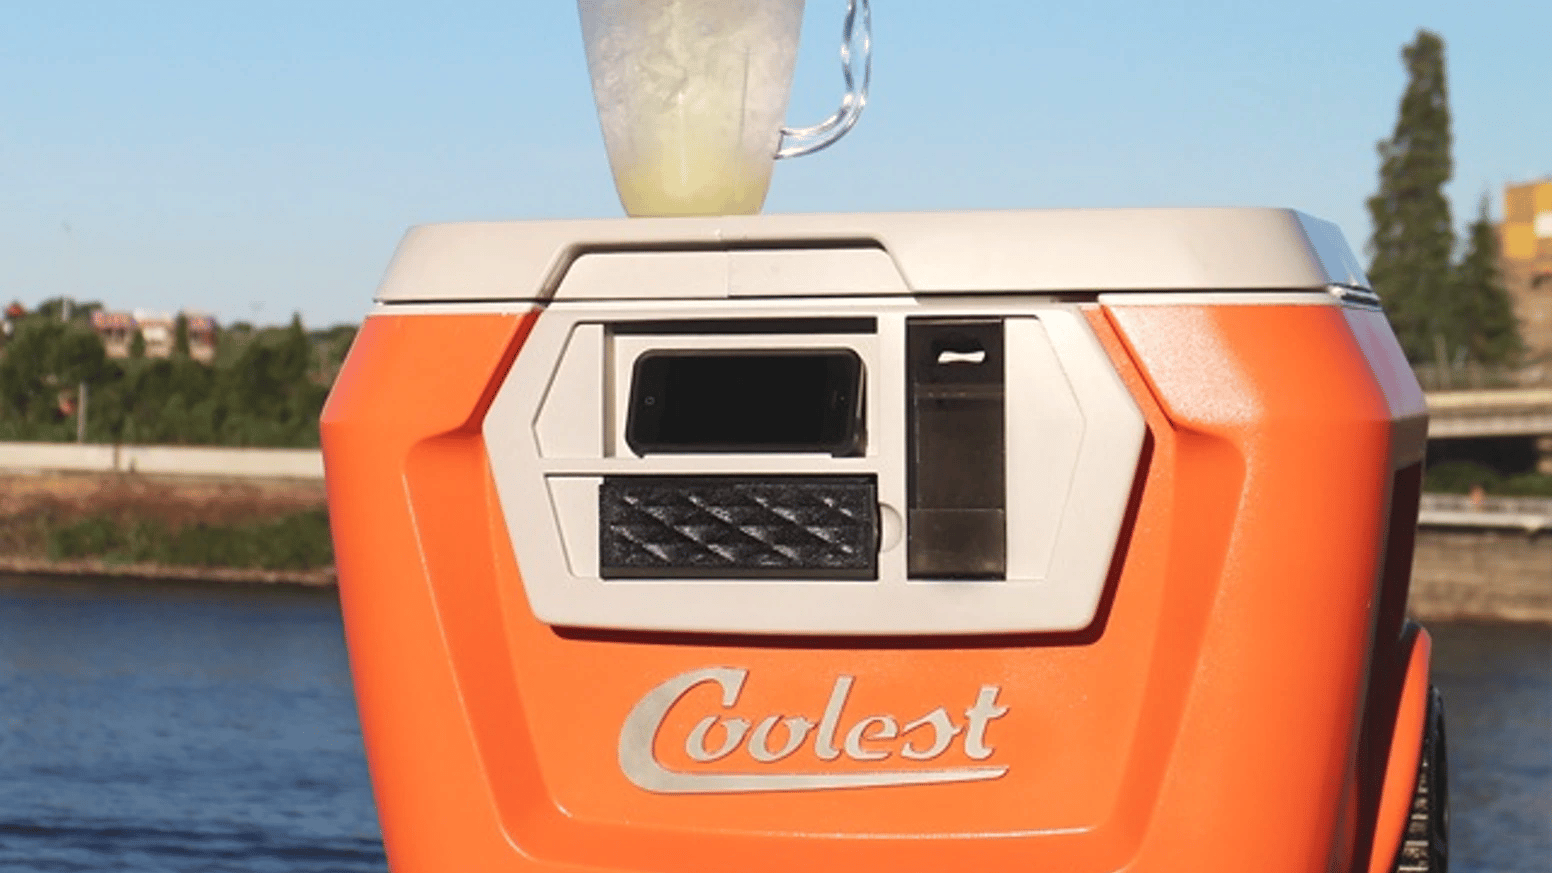 Coolest Cooler isn’t really one of the most successful kickstarter campaigns.